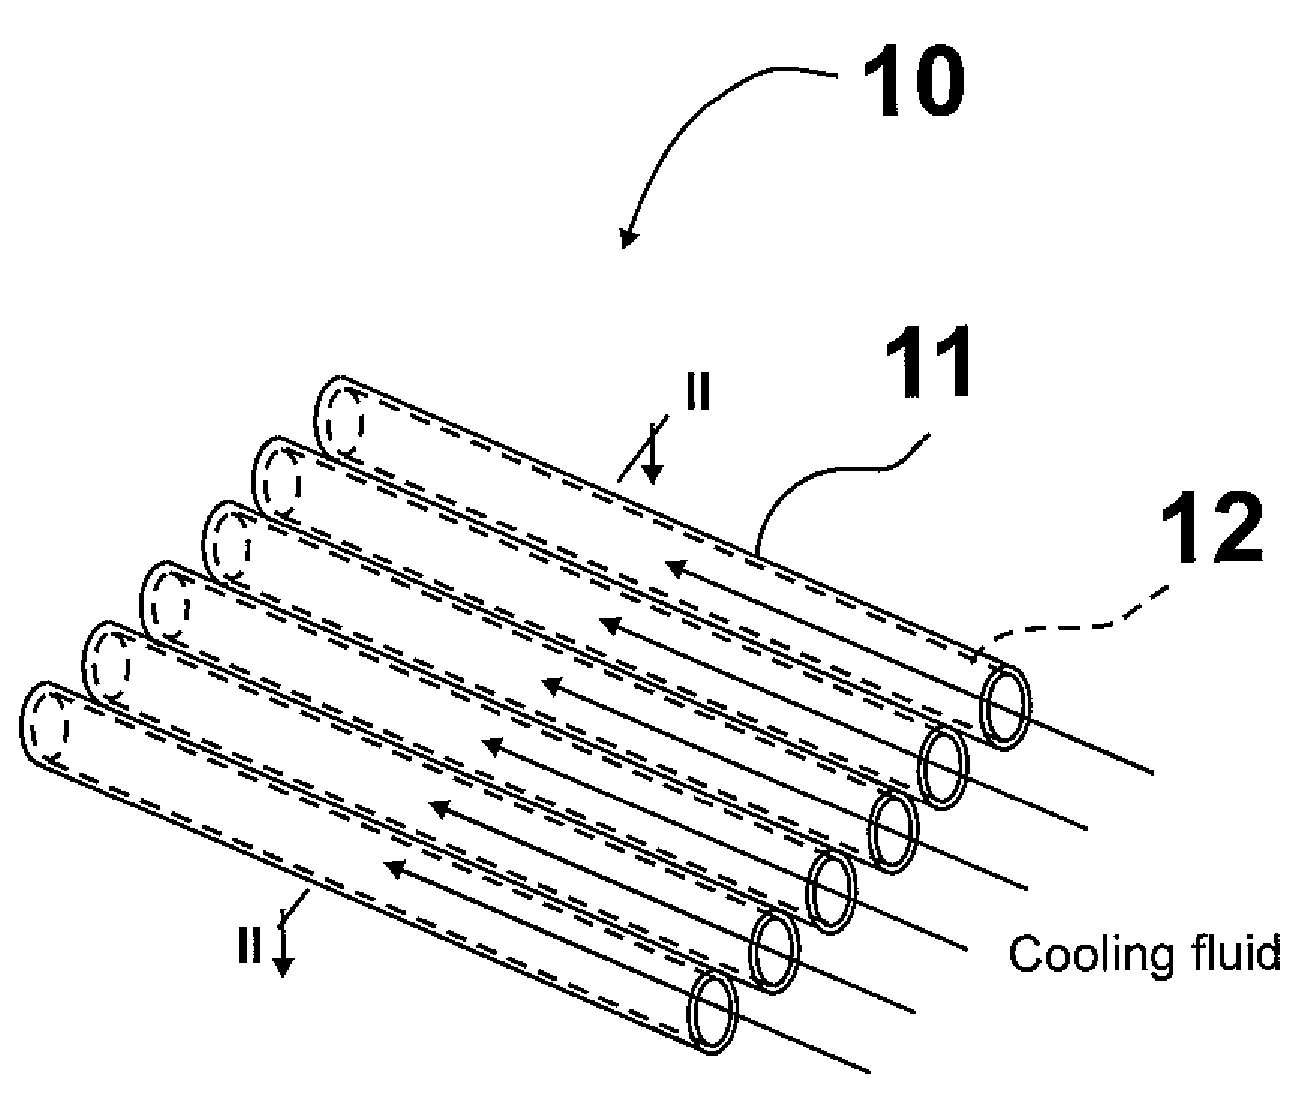 Supported metal membrane with internal cooling for H2 separation